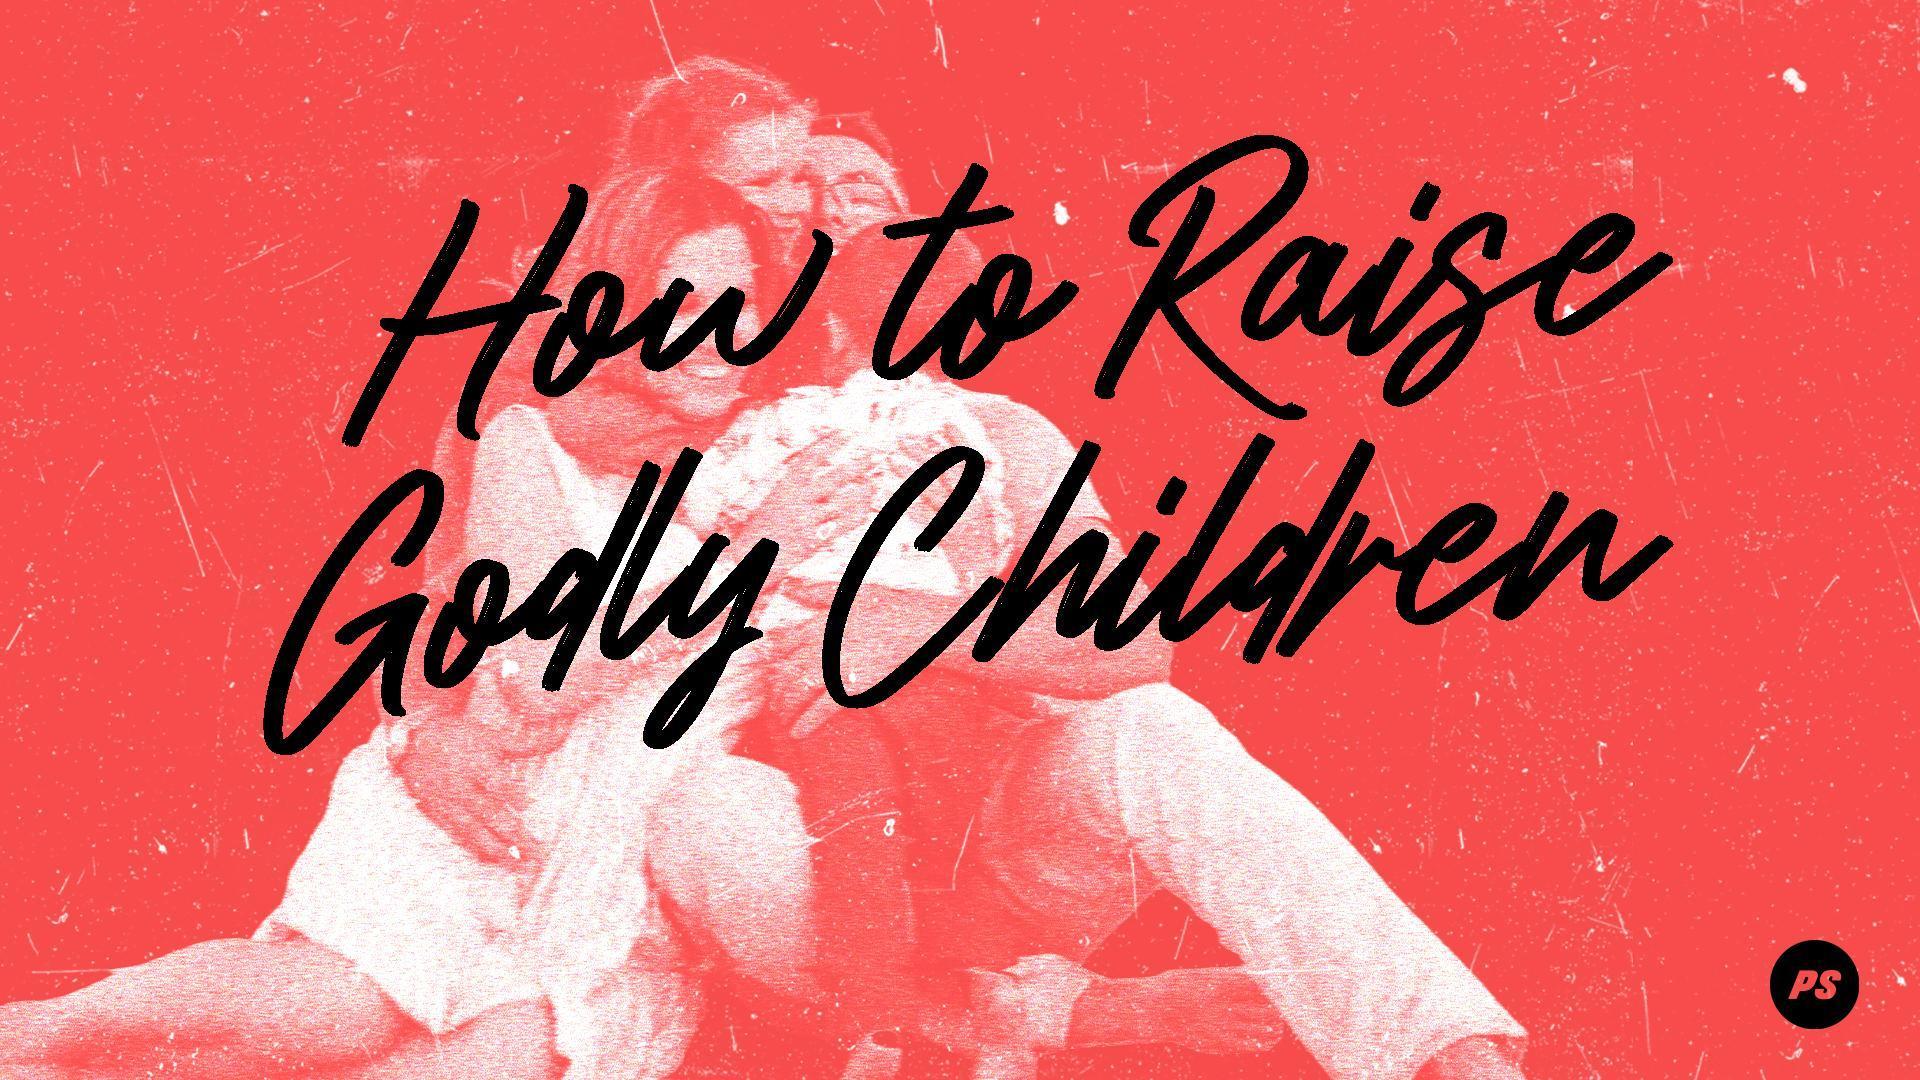 Featured Image for “How to raise godly children?”